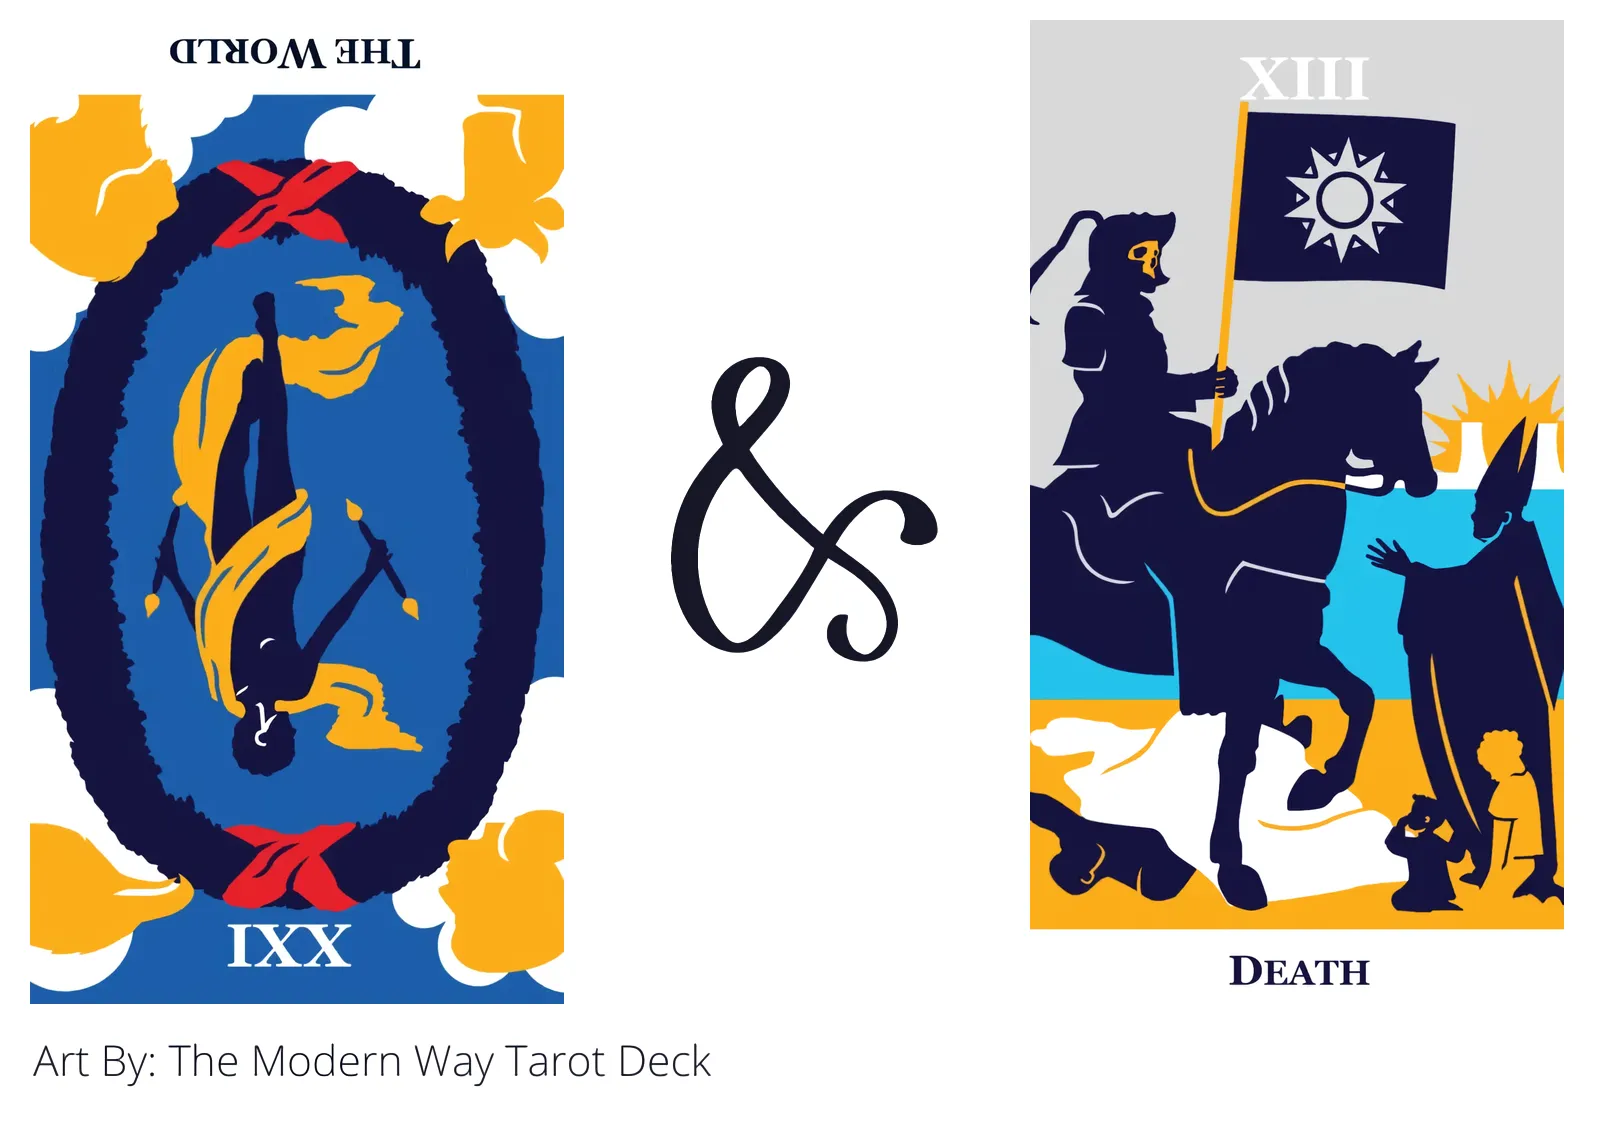 the world reversed and death tarot cards together